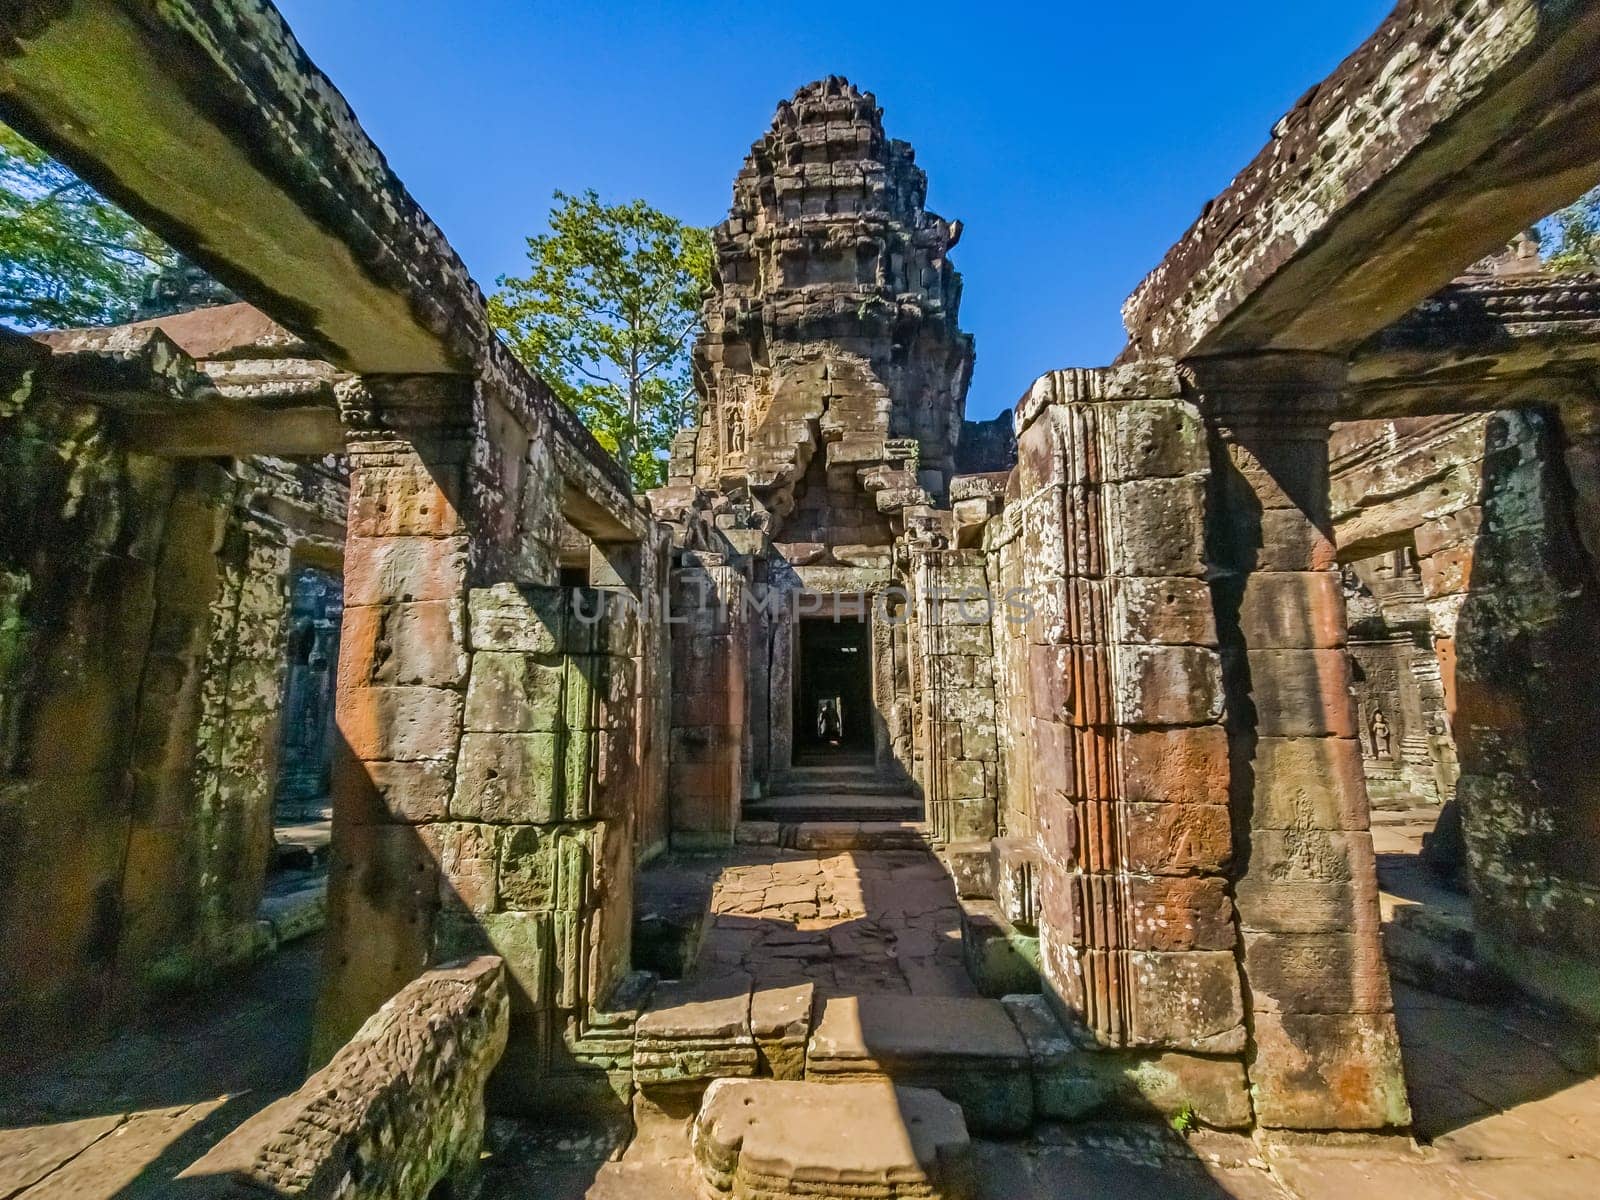 Banteay Kdei temple at Angkor Thom by day, Siem Reap, Cambodia